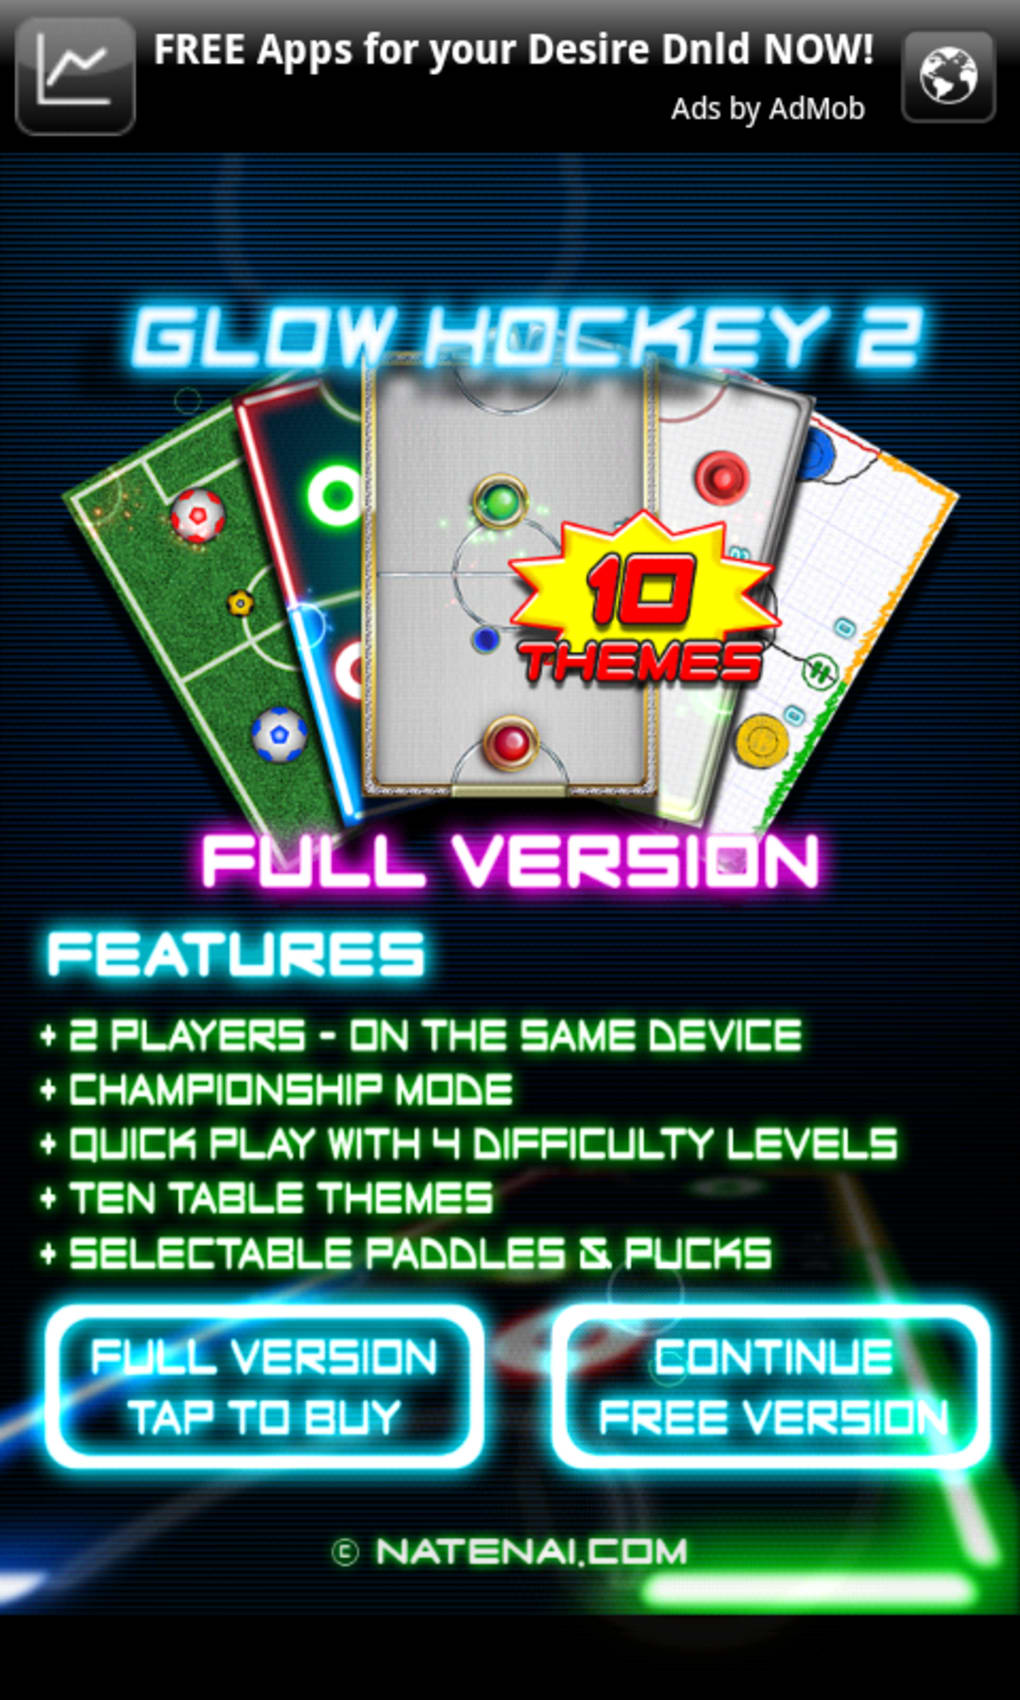 Air Hockey: 2 Player Games APK + Mod for Android.